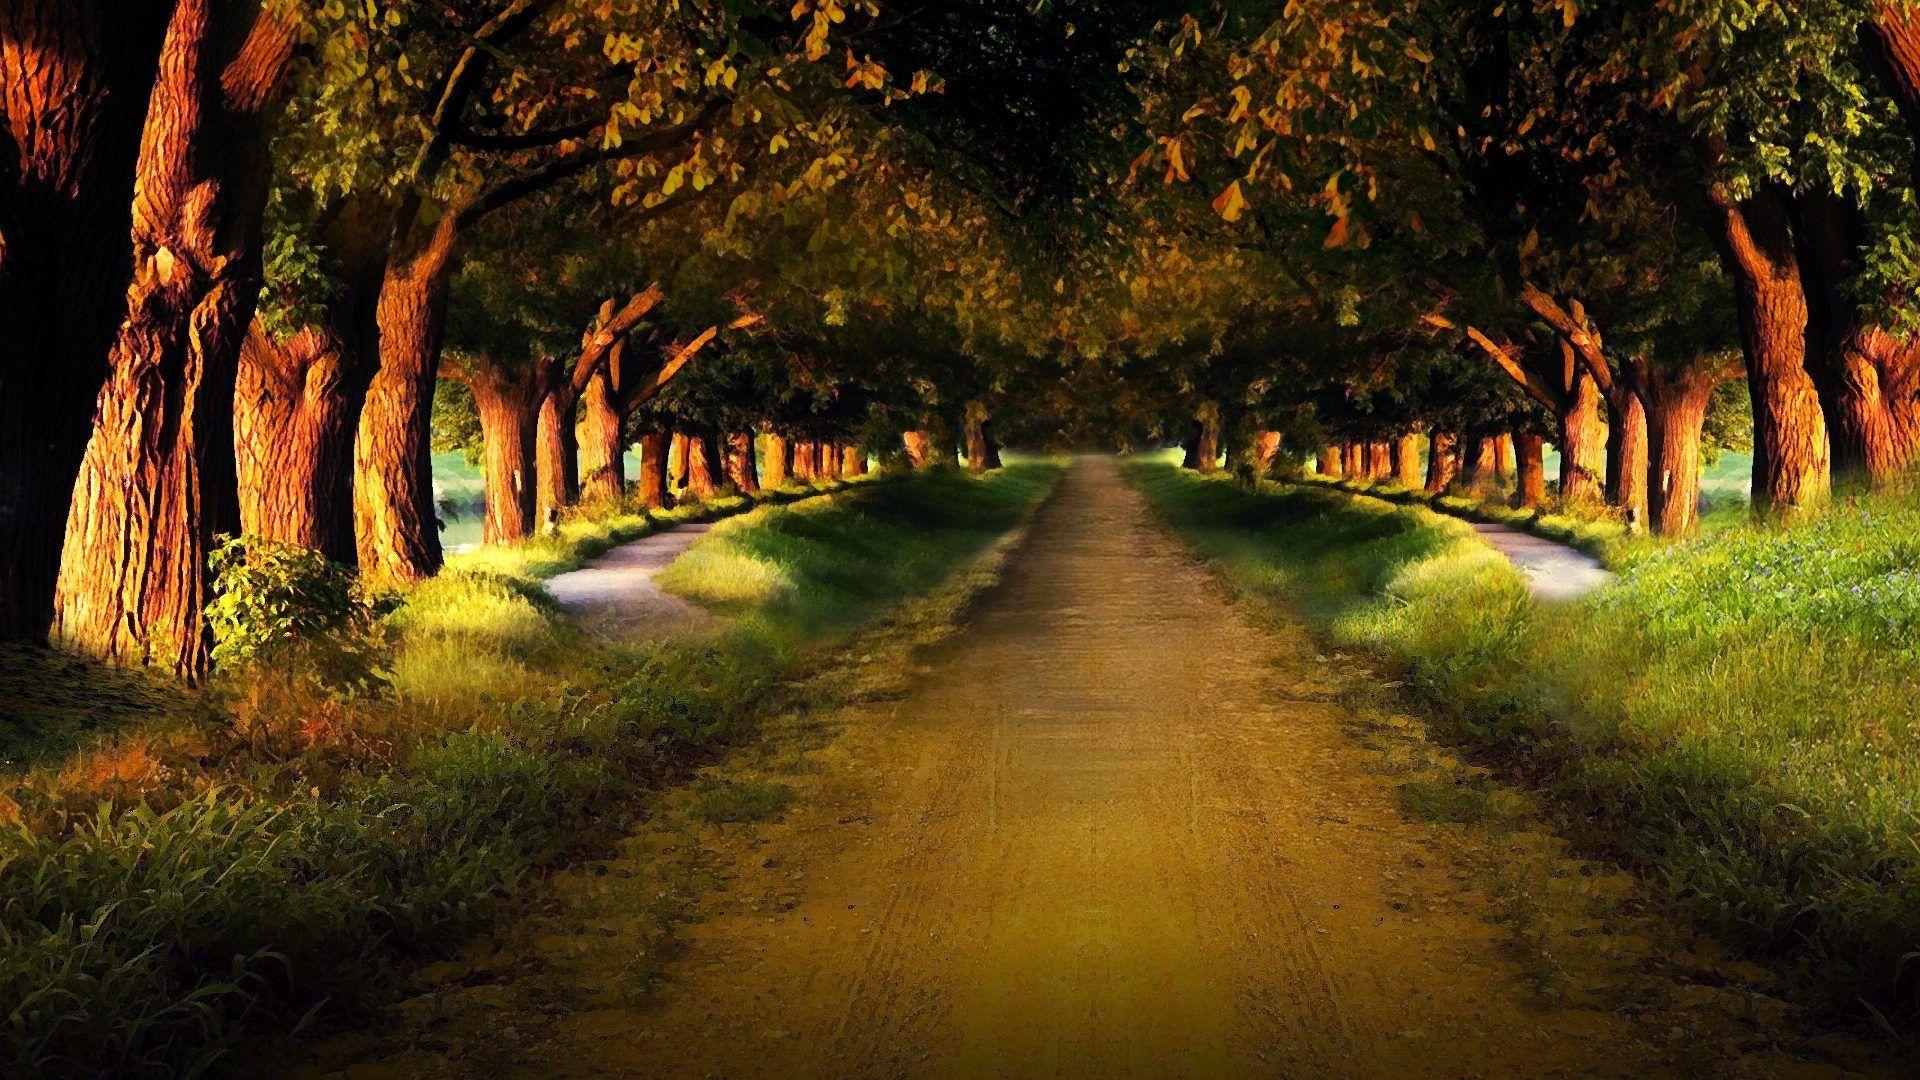 Nature HD Image Wallpaper road garden avenue ranks track mysterious